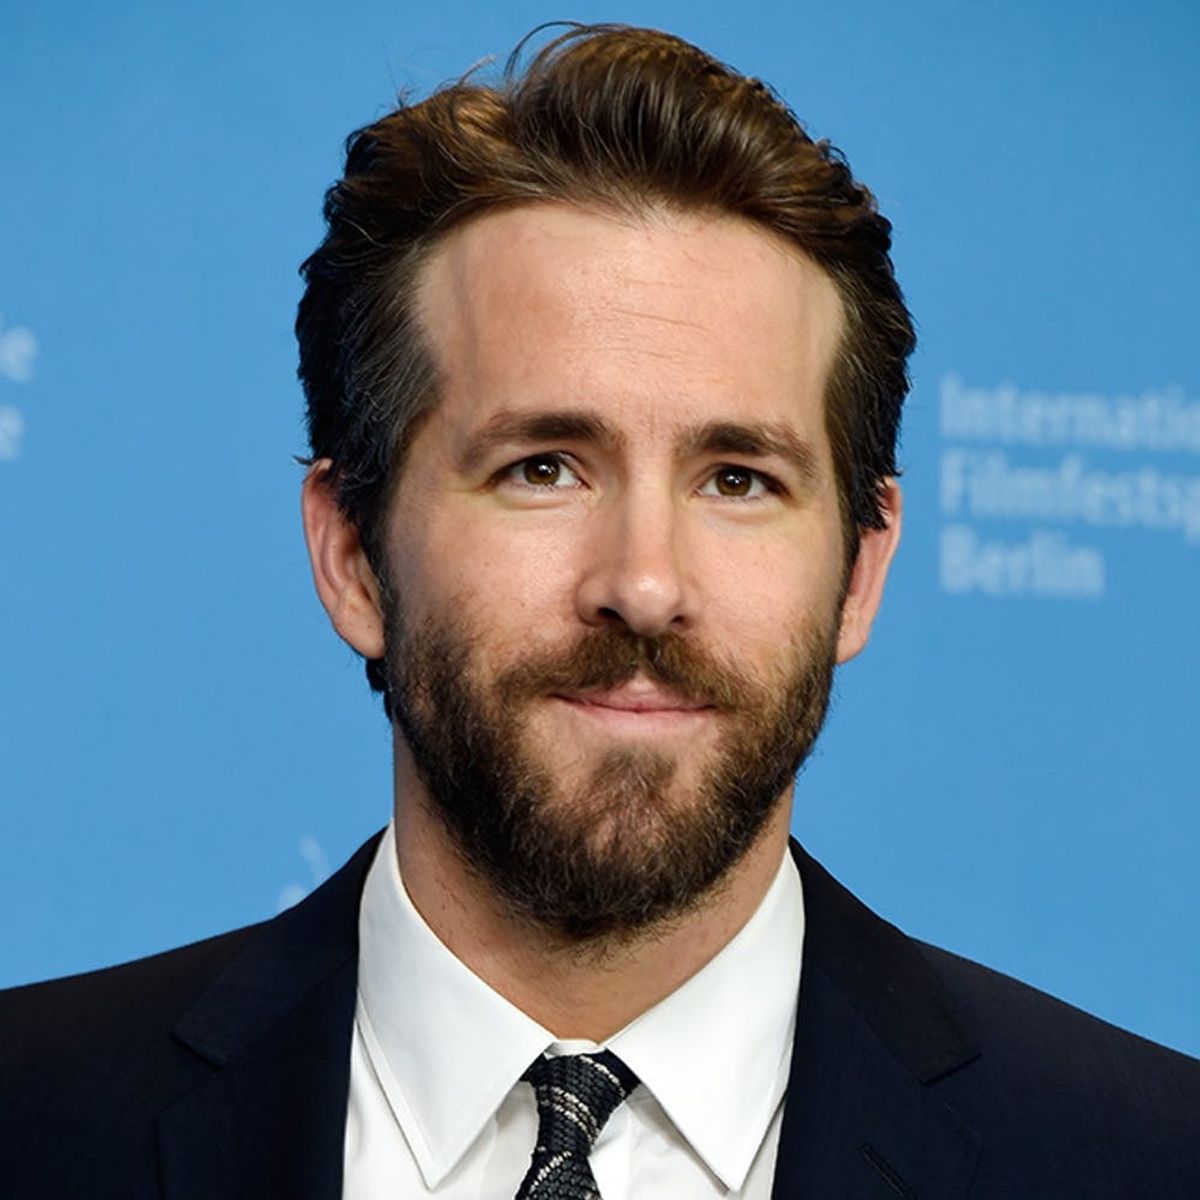 Ryan Reynolds Just Joined Instagram (+ 7 Other Celeb Power Couples to Follow)